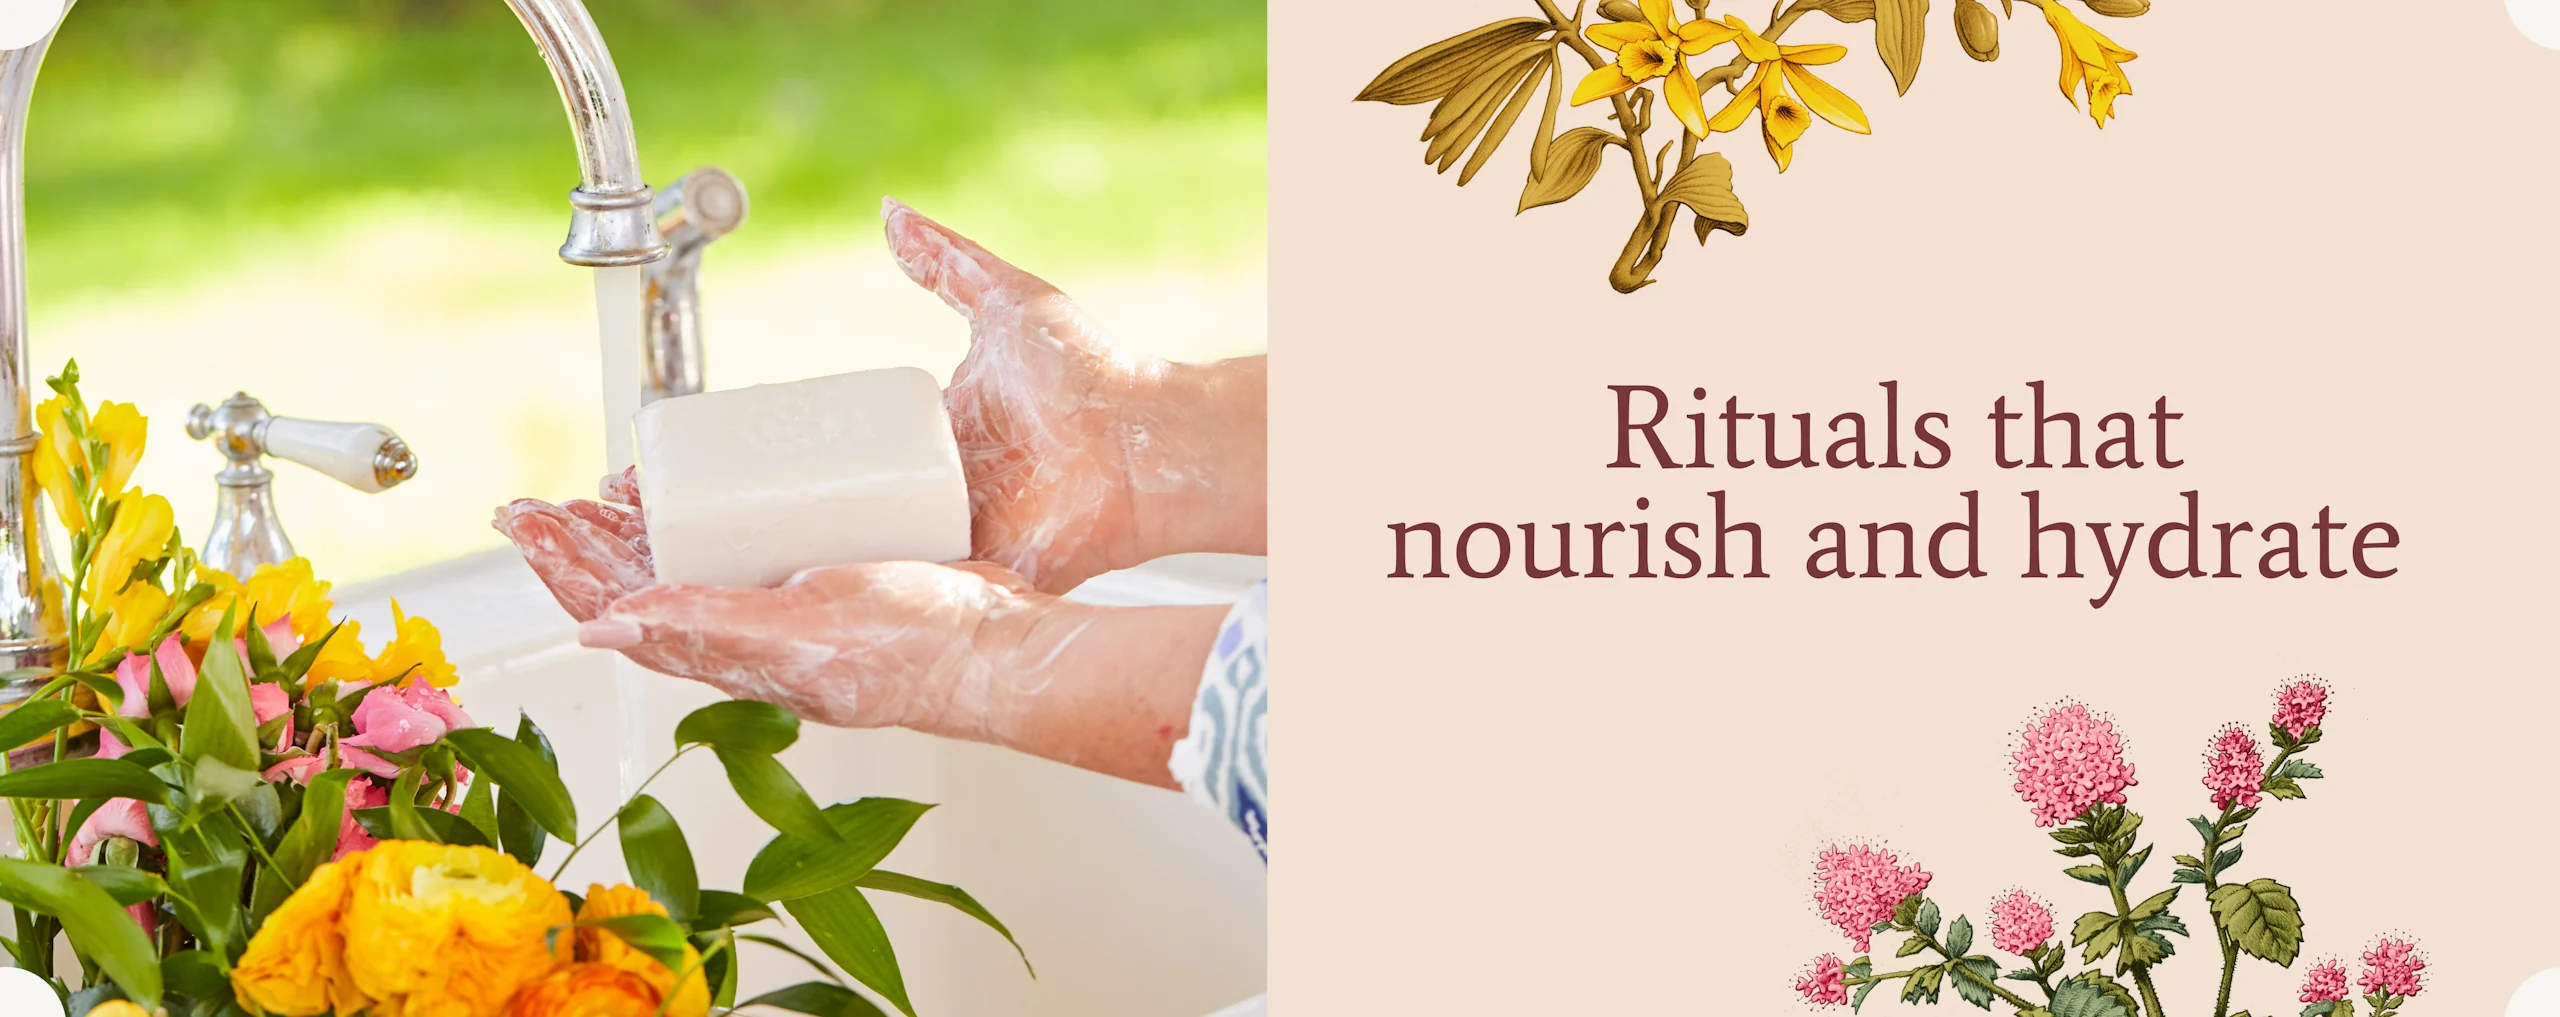 Rituals that nourish and hydrate